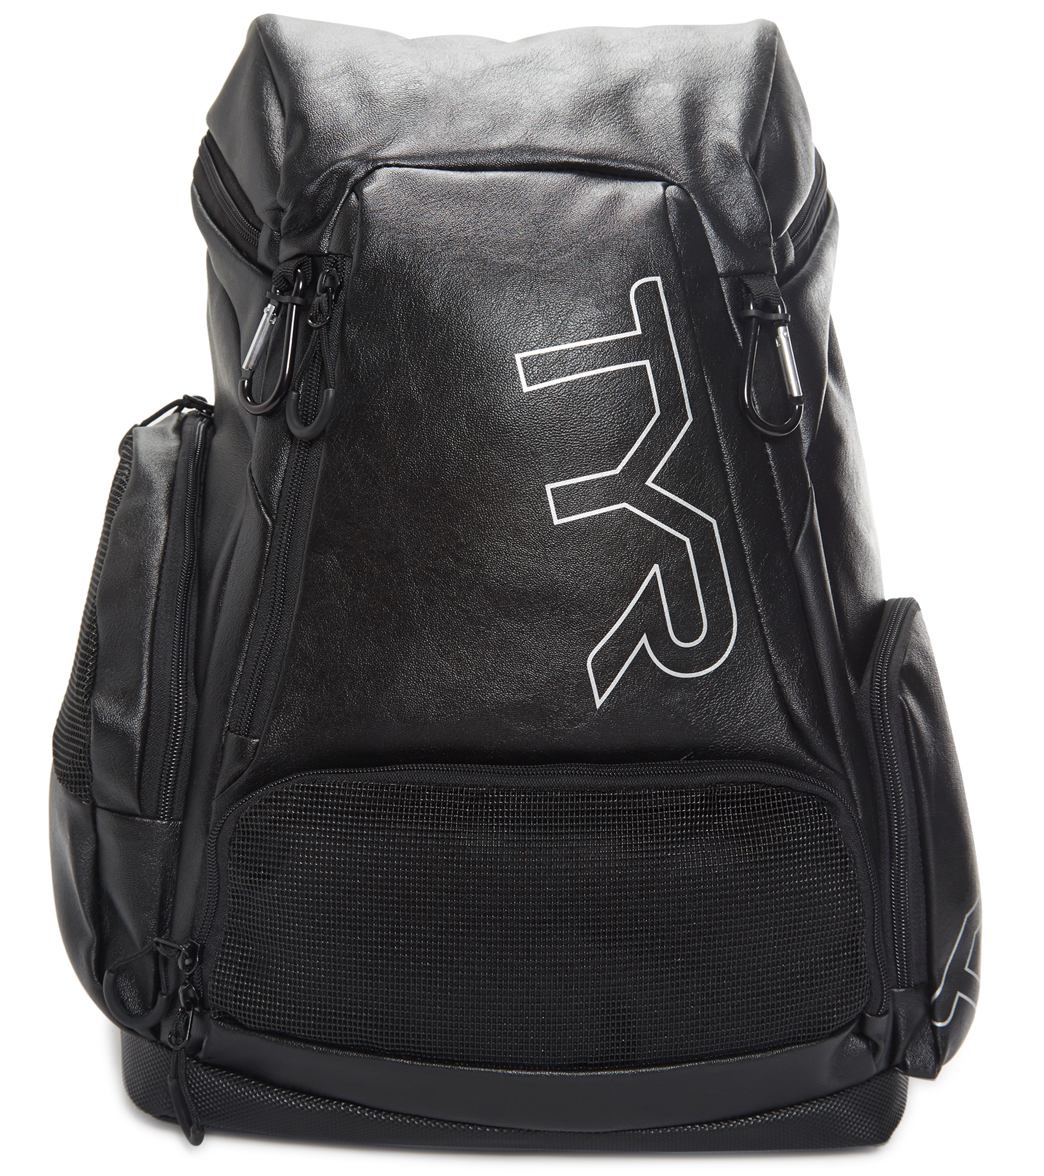 TYR Alliance 30L Leather Backpack - Black - Swimoutlet.com